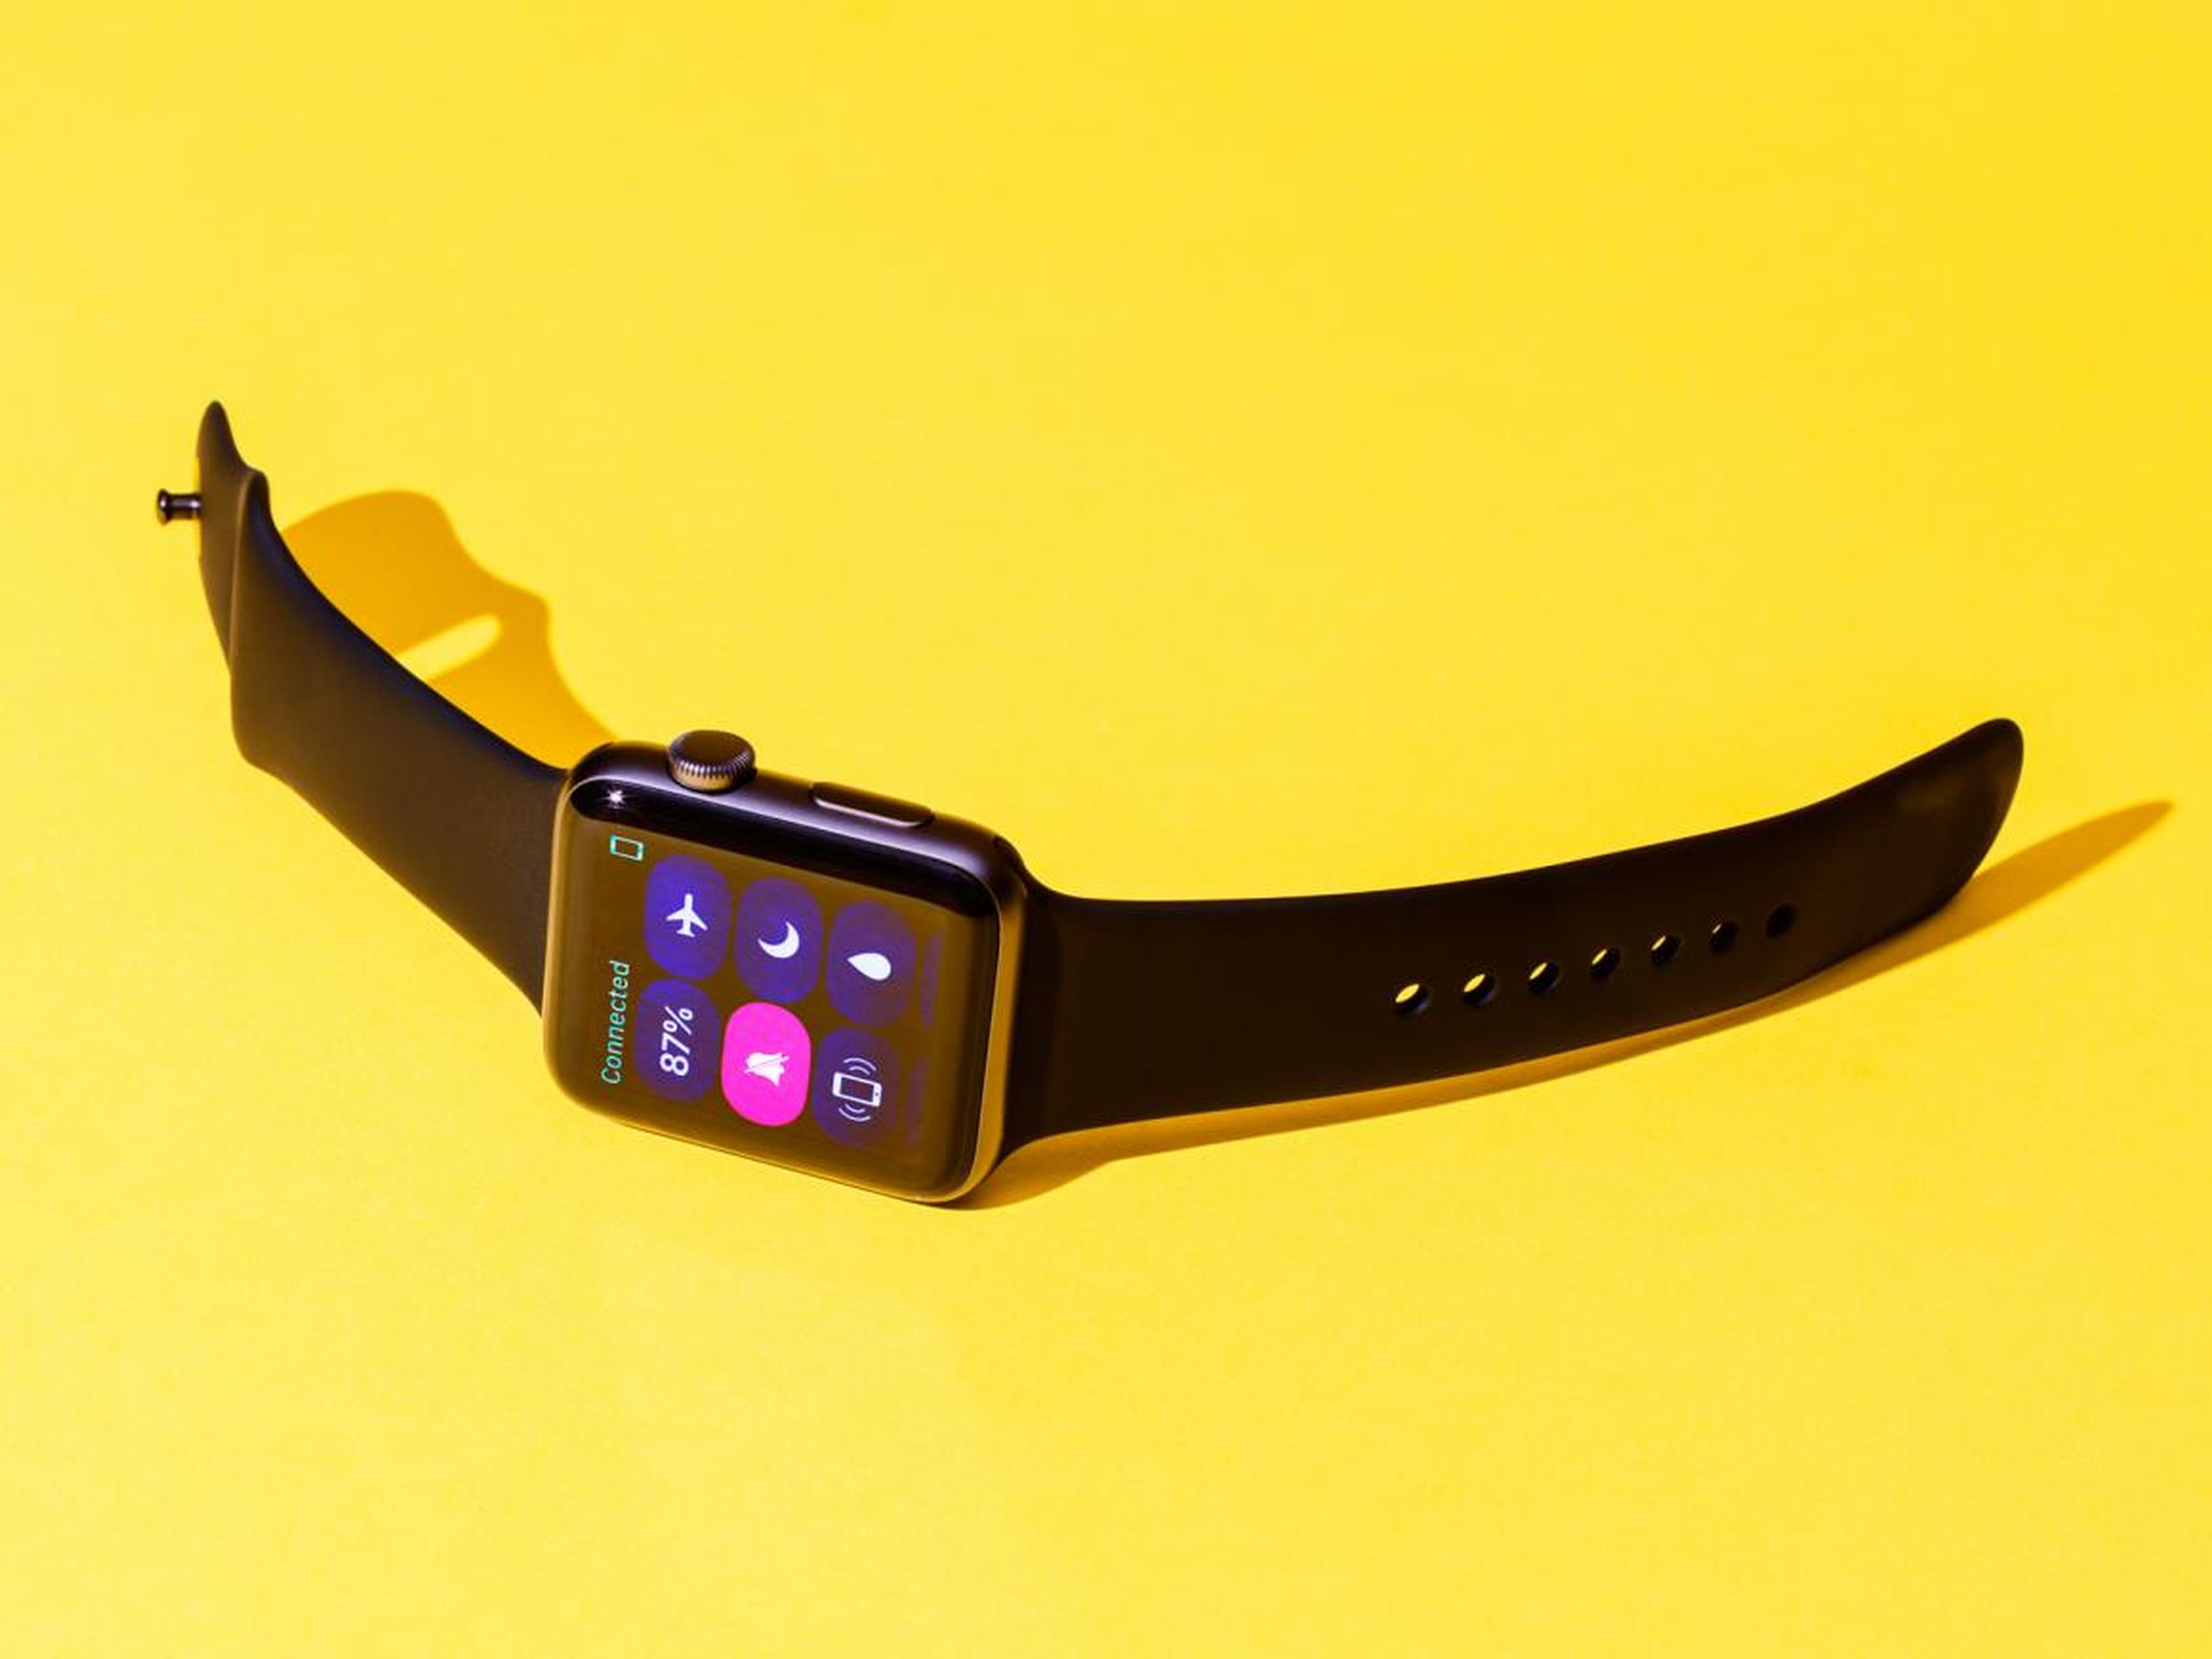 An unprecedented study suggests the Apple Watch can help detect heart problems. But very few people actually used it to do that.